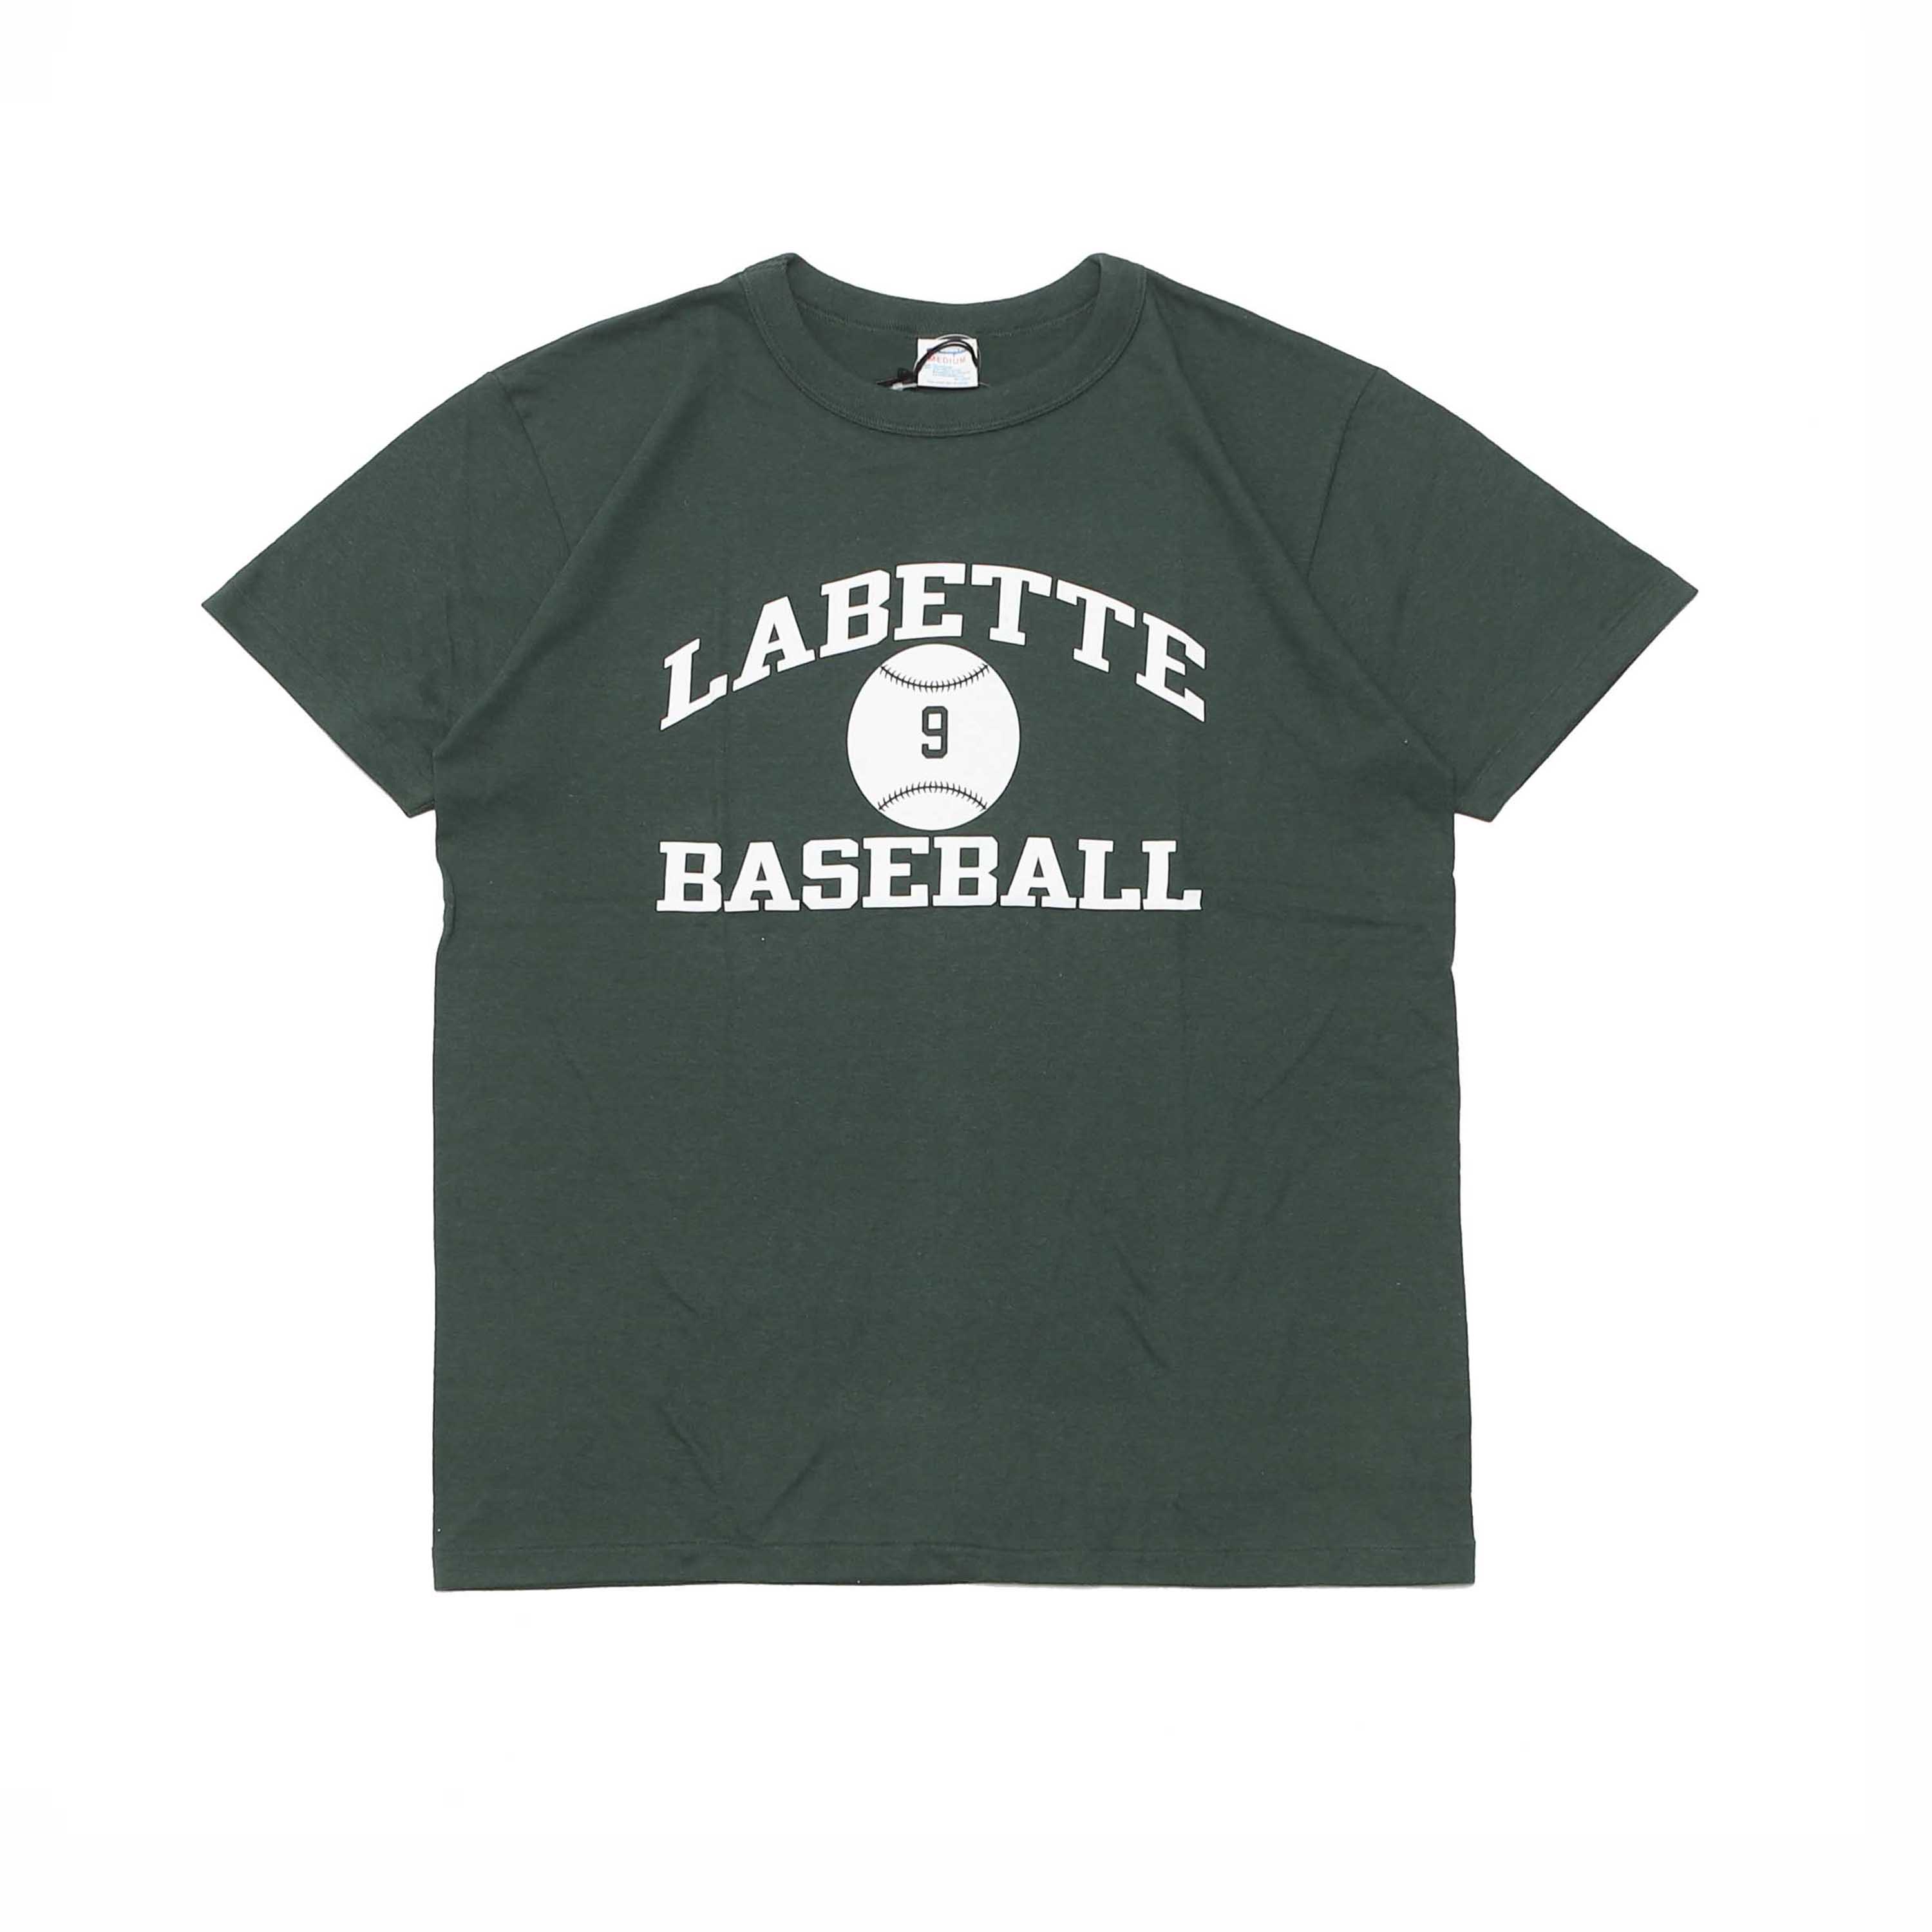 TRUE TO ARCHIVES PRINTED S/S TEE - LABETTE GREEN